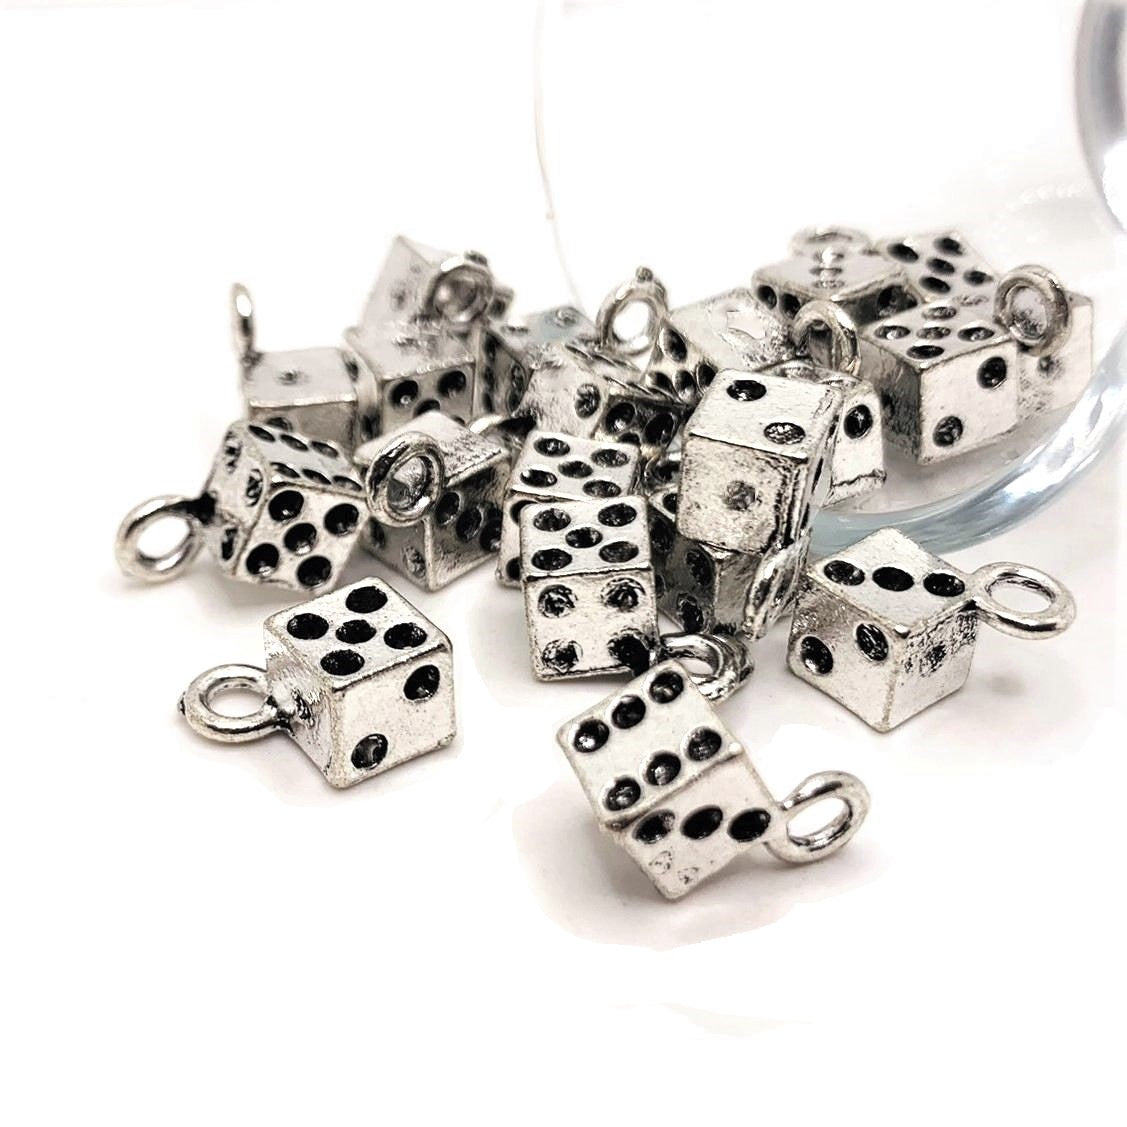 4, 20 or 50 Pieces: Silver Dice Gambler 3D Charms